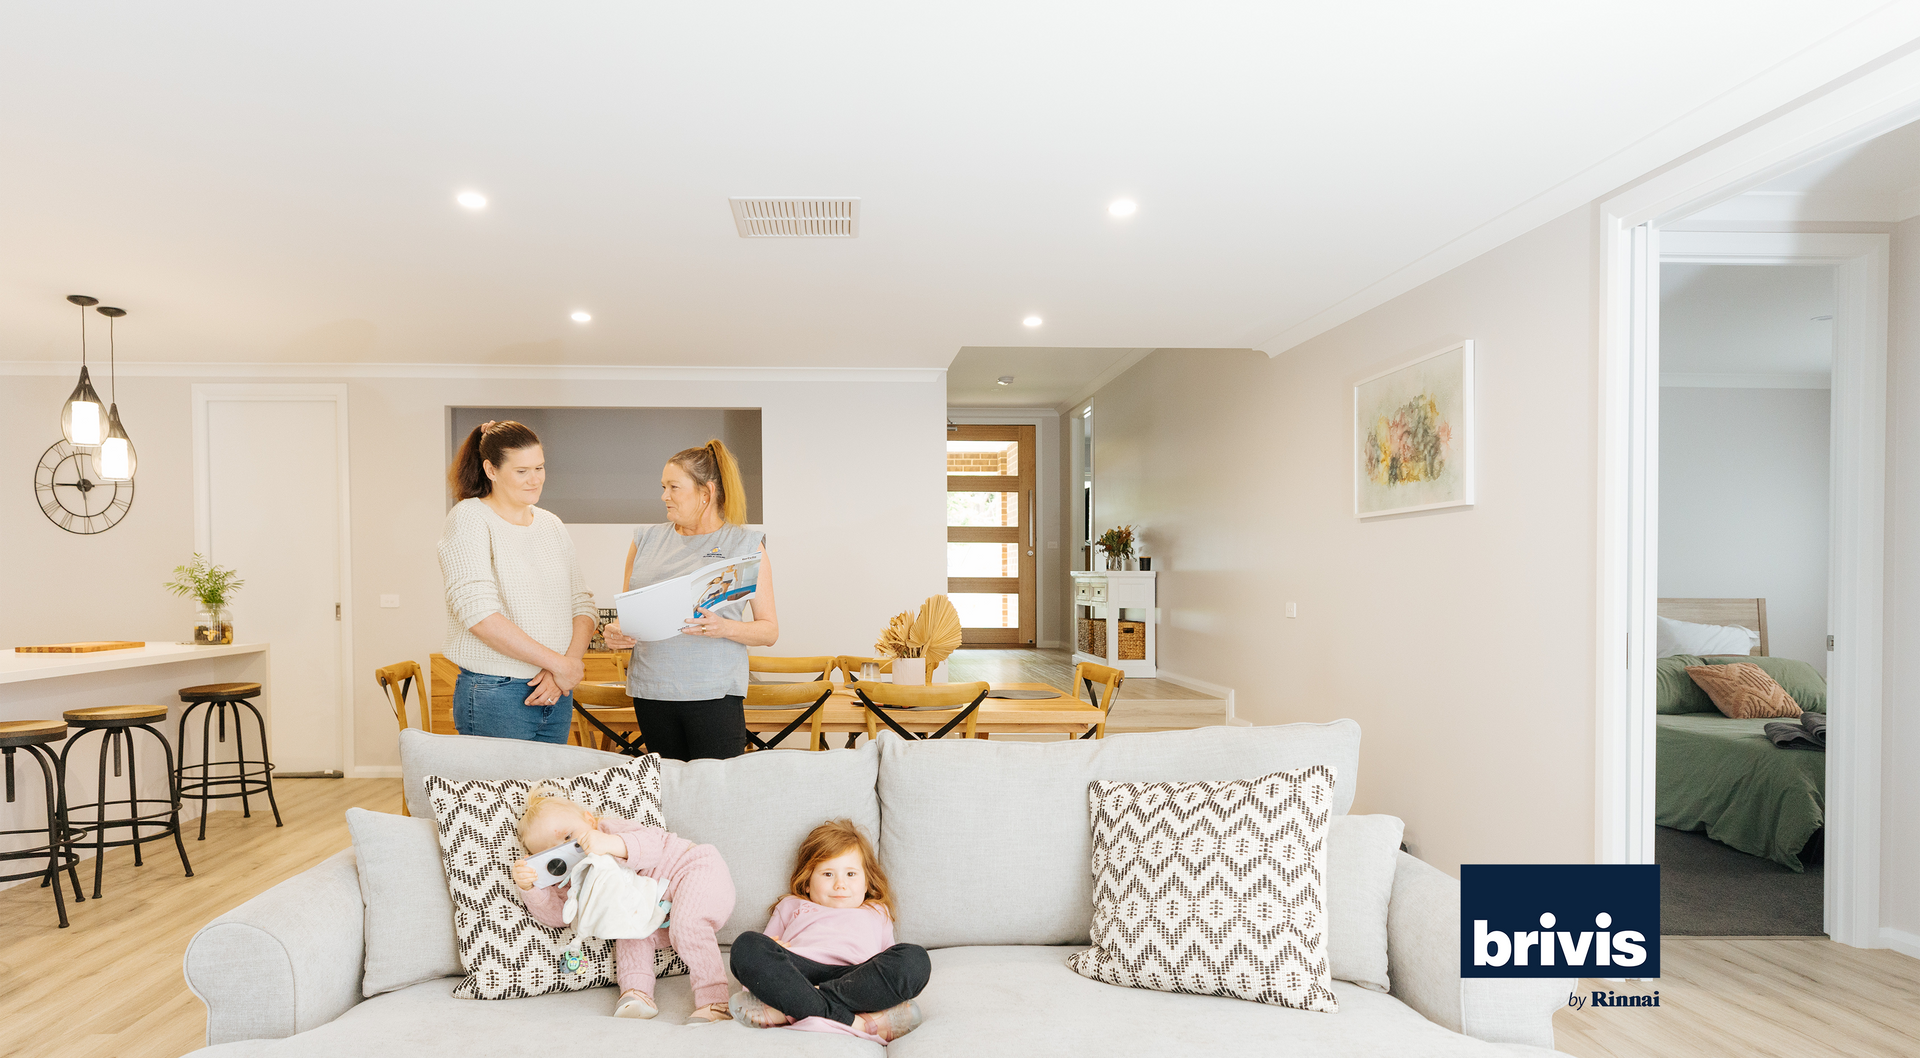 Family smiling in living room with Brivis by Rinnai logo in corner 